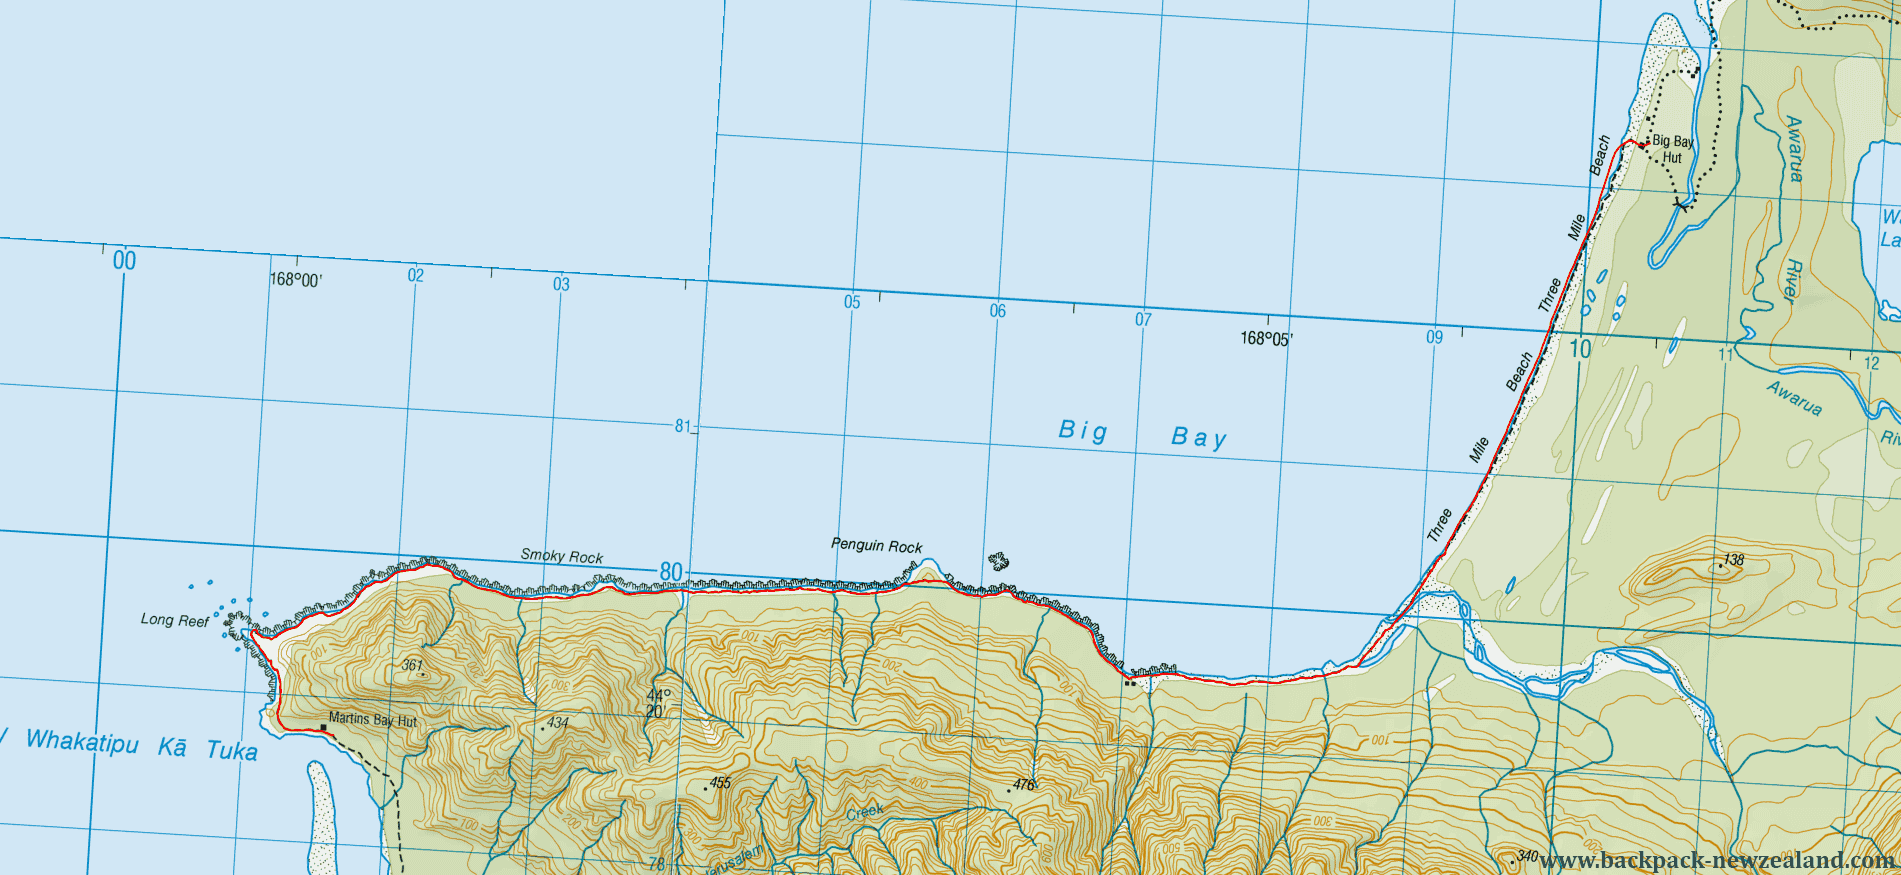 Long Reef Point To Big Bay Hut Track Map - New Zealand Tracks